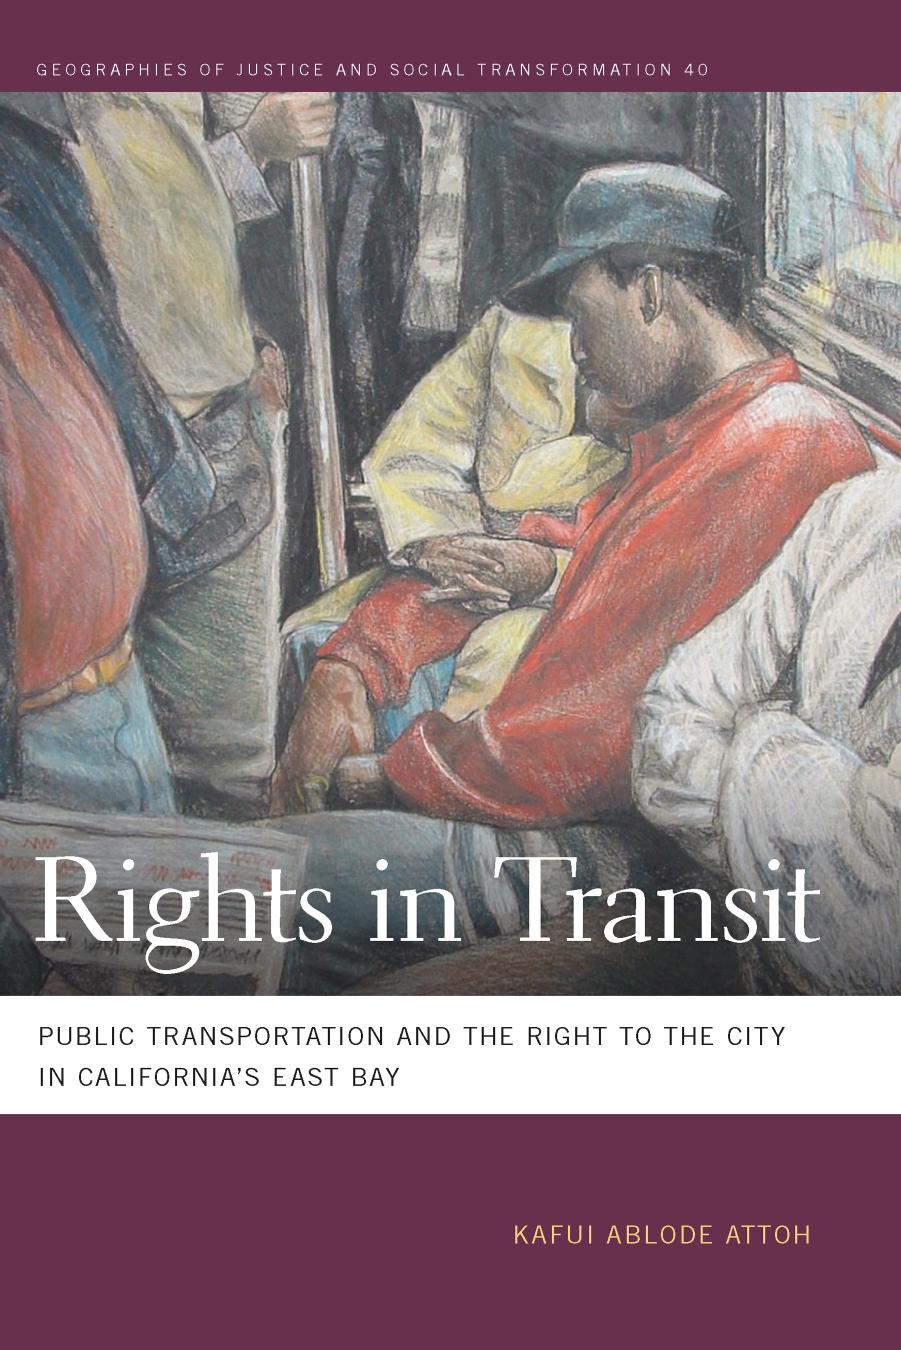 Rights in Transit: Public Transportation and the Right to the City in California's East Bay by Kafui Ablode Attoh